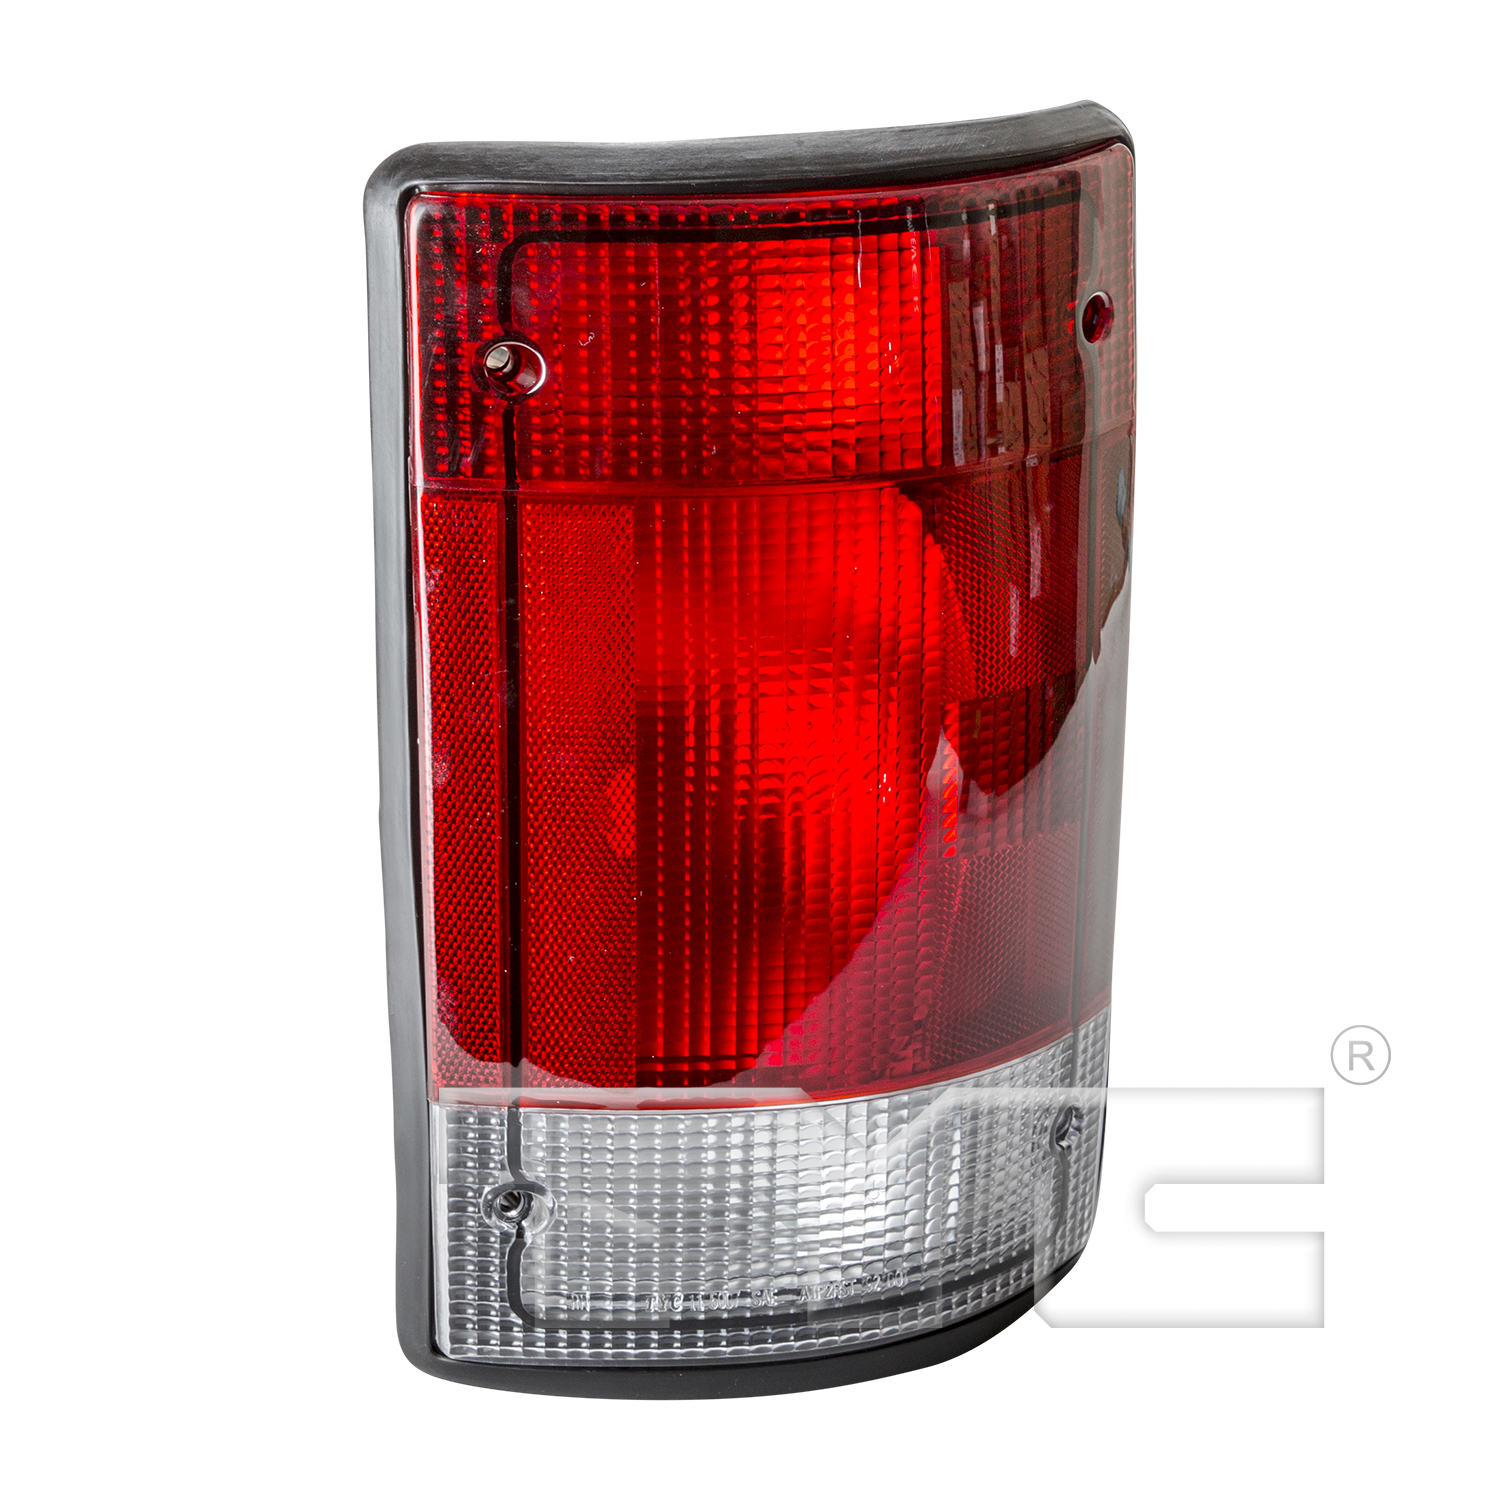 Aftermarket TAILLIGHTS for FORD - E-350 SUPER DUTY, E-350 SUPER DUTY,99-03,RT Taillamp assy